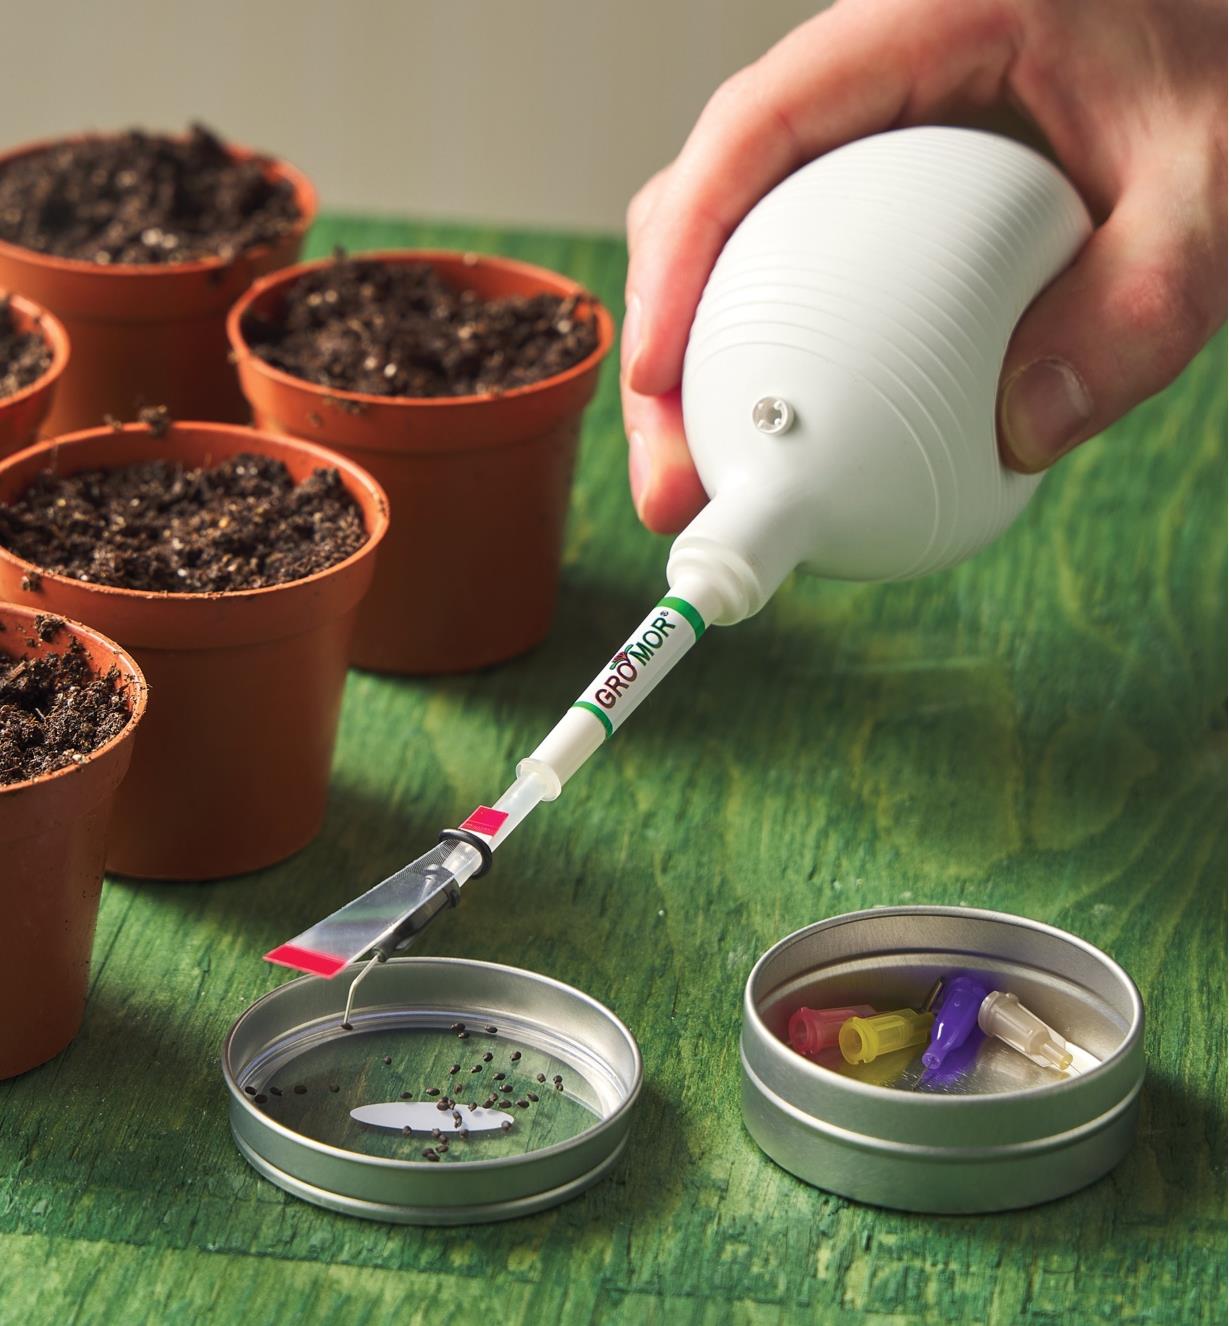 Using a mini wand seeder with a magnifier to pick up a tiny seed next to pots of soil